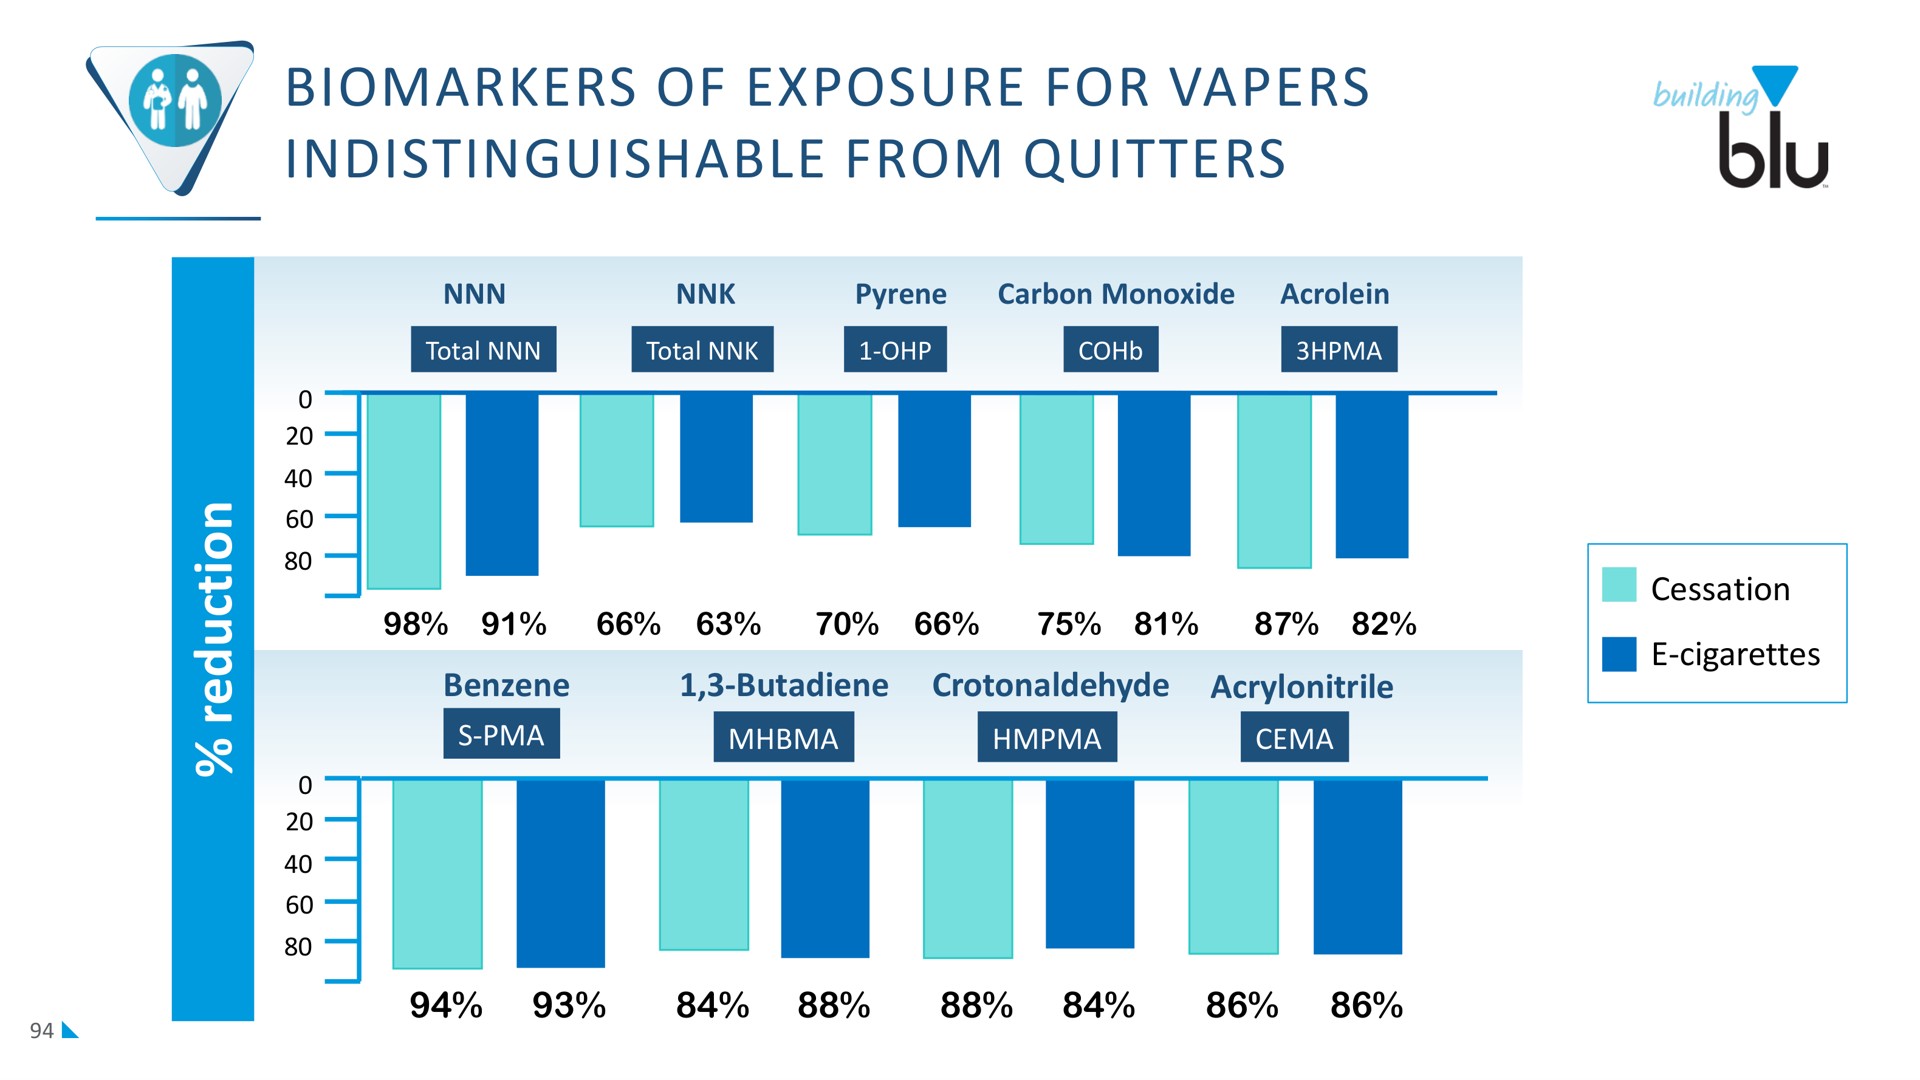 of exposure for indistinguishable from quitters | Imperial Brands